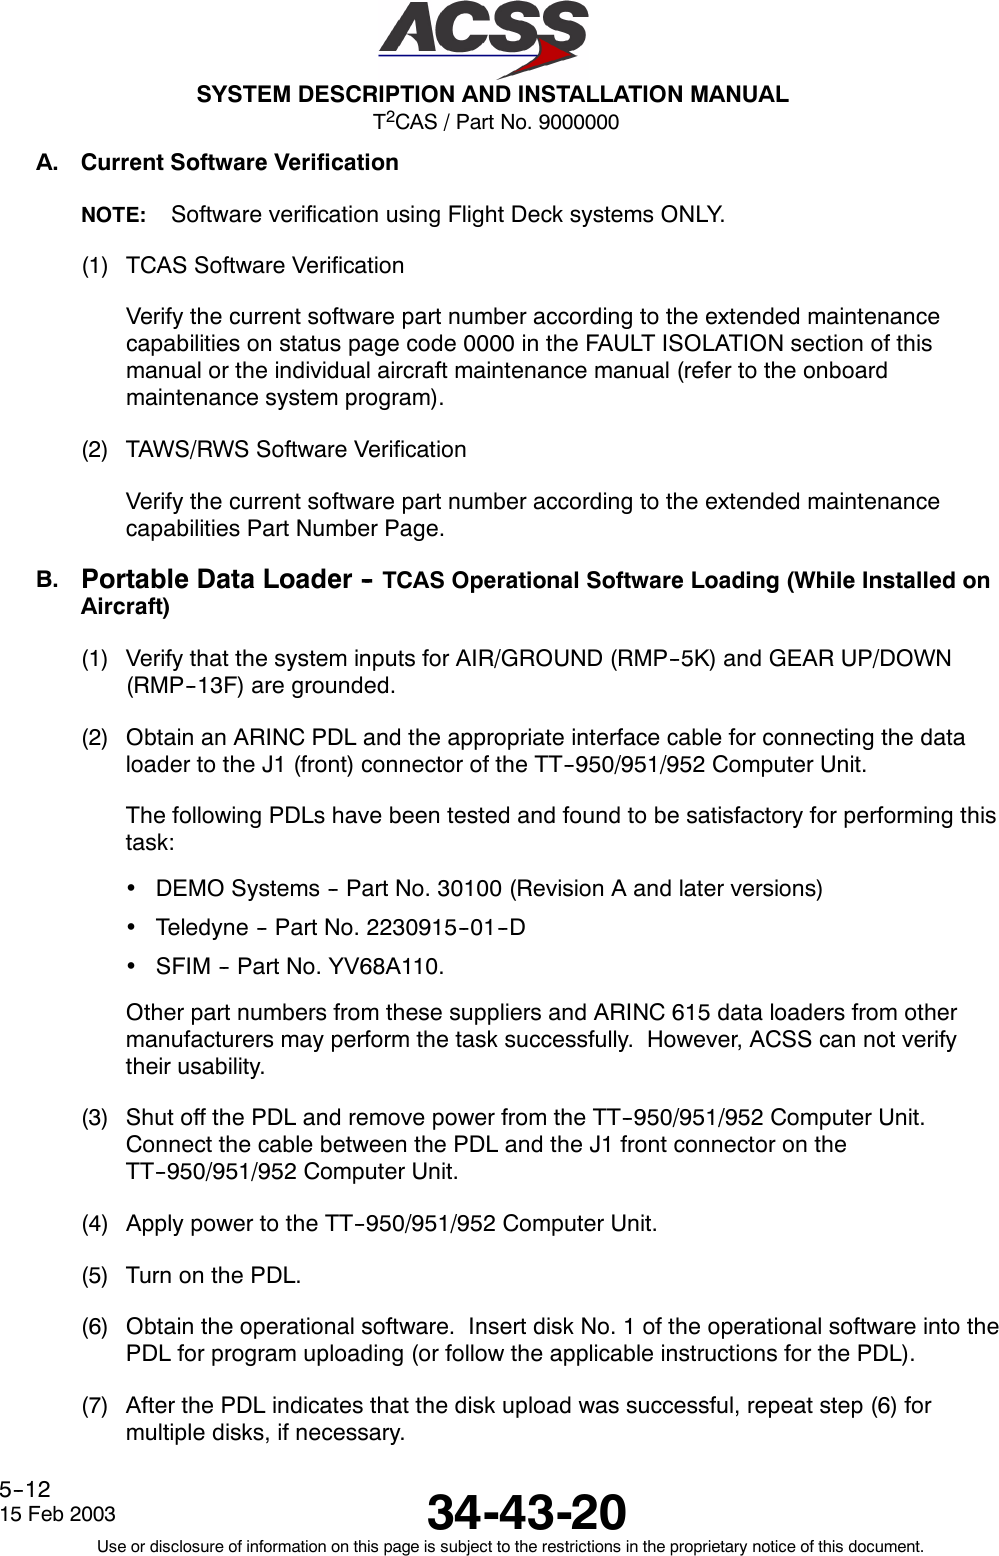 T2CAS / Part No. 9000000SYSTEM DESCRIPTION AND INSTALLATION MANUAL34-43-2015 Feb 2003Use or disclosure of information on this page is subject to the restrictions in the proprietary notice of this document.5--12A. Current Software VerificationNOTE: Software verification using Flight Deck systems ONLY.(1) TCAS Software VerificationVerify the current software part number according to the extended maintenancecapabilities on status page code 0000 in the FAULT ISOLATION section of thismanual or the individual aircraft maintenance manual (refer to the onboardmaintenance system program).(2) TAWS/RWS Software VerificationVerify the current software part number according to the extended maintenancecapabilities Part Number Page.B. Portable Data Loader -- TCAS Operational Software Loading (While Installed onAircraft)(1) Verify that the system inputs for AIR/GROUND (RMP--5K) and GEAR UP/DOWN(RMP--13F) are grounded.(2) Obtain an ARINC PDL and the appropriate interface cable for connecting the dataloader to the J1 (front) connector of the TT--950/951/952 Computer Unit.The following PDLs have been tested and found to be satisfactory for performing thistask:•DEMO Systems -- Part No. 30100 (Revision A and later versions)•Teledyne -- Part No. 2230915--01--D•SFIM -- Part No. YV68A110.Other part numbers from these suppliers and ARINC 615 data loaders from othermanufacturers may perform the task successfully. However, ACSS can not verifytheir usability.(3) Shut off the PDL and remove power from the TT--950/951/952 Computer Unit.Connect the cable between the PDL and the J1 front connector on theTT--950/951/952 Computer Unit.(4) Apply power to the TT--950/951/952 Computer Unit.(5) Turn on the PDL.(6) Obtain the operational software. Insert disk No. 1 of the operational software into thePDL for program uploading (or follow the applicable instructions for the PDL).(7) After the PDL indicates that the disk upload was successful, repeat step (6) formultiple disks, if necessary.